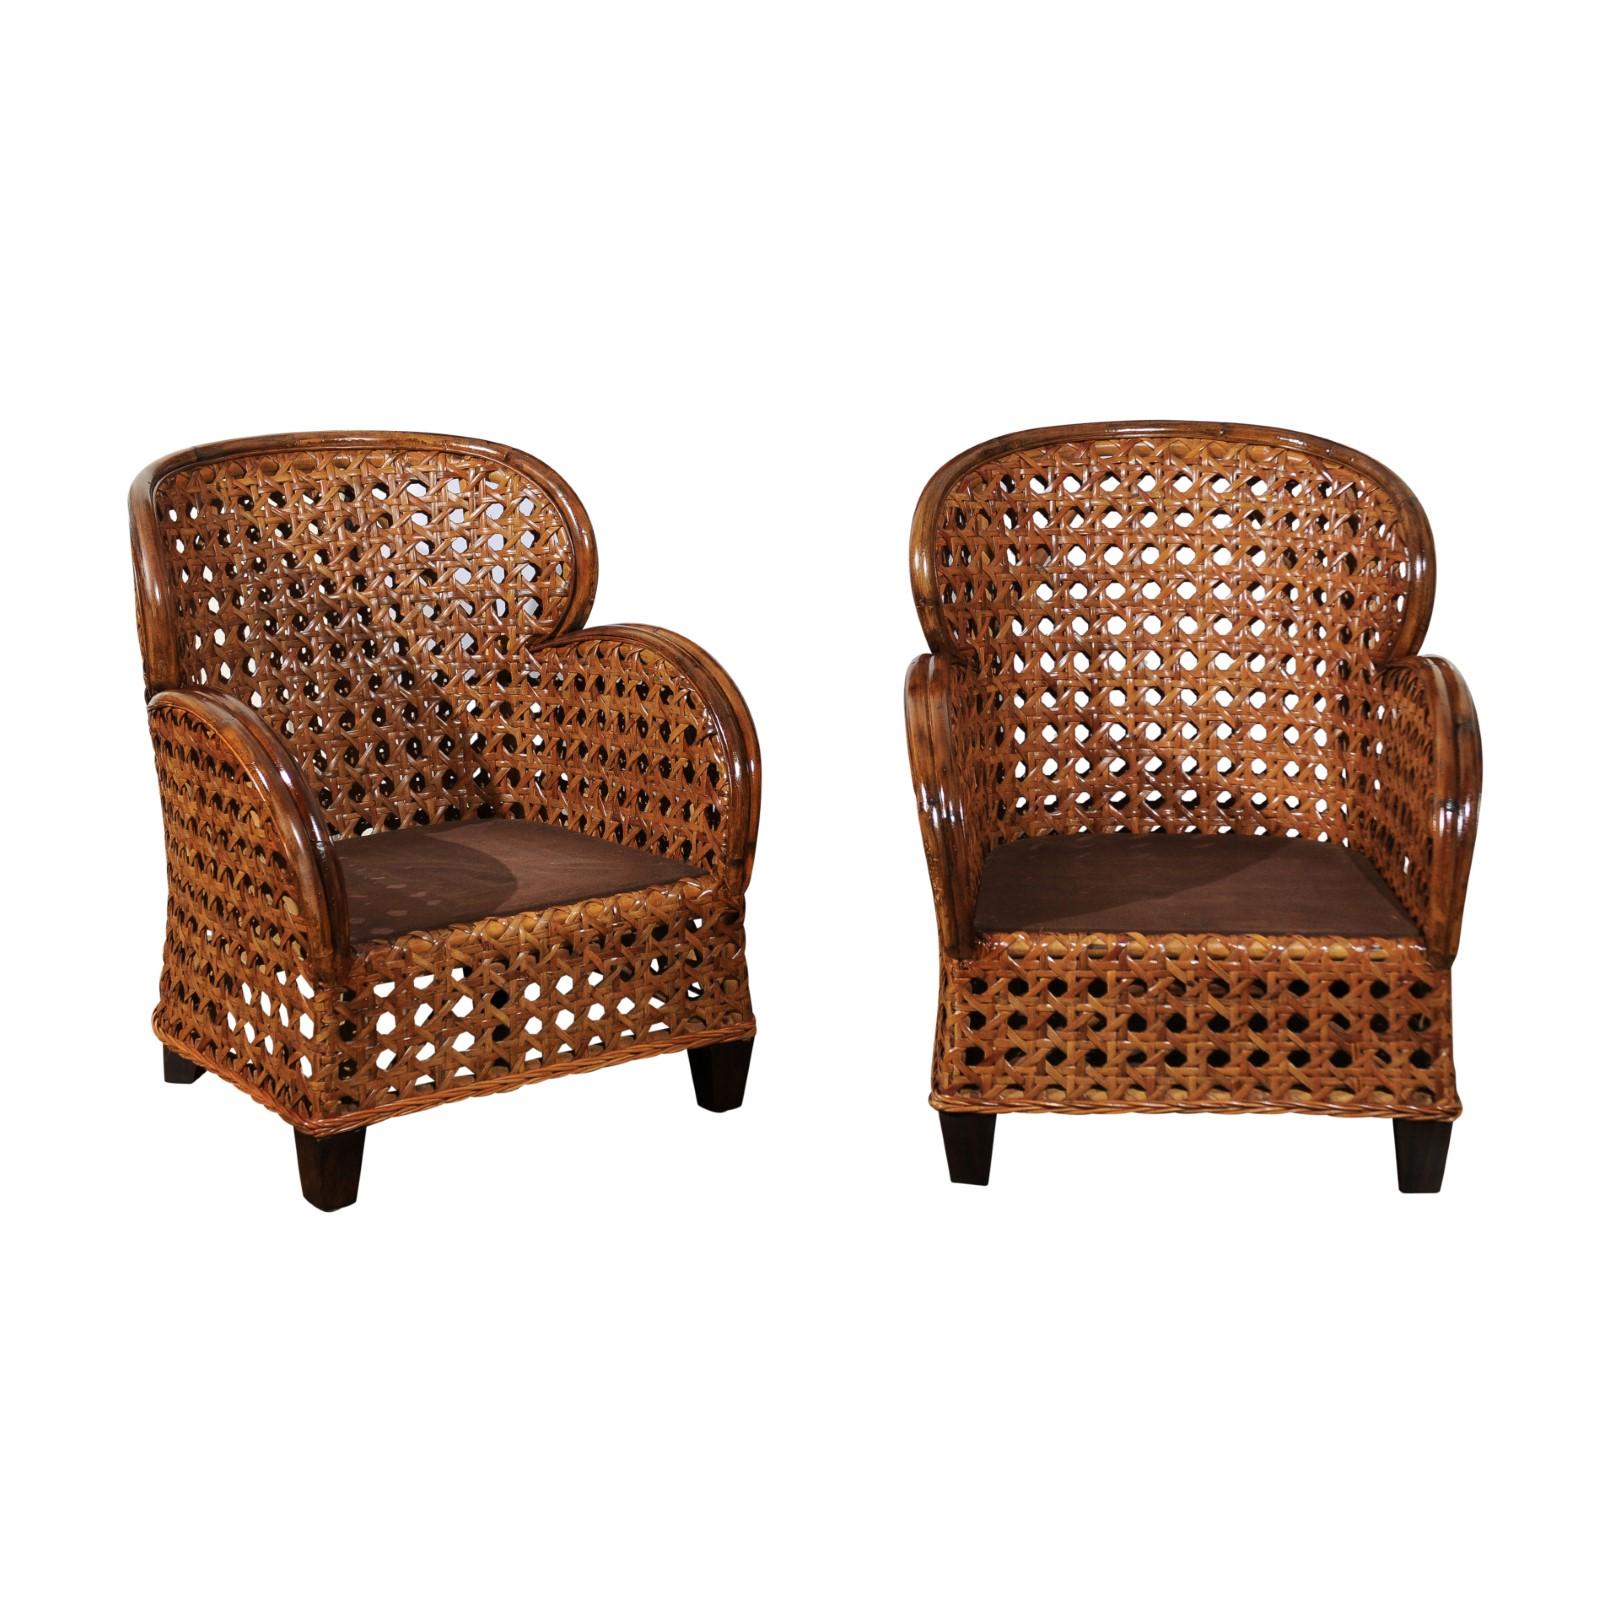 Radiant Pair of Art Deco Revival Club Chairs in Magnificent French Cane